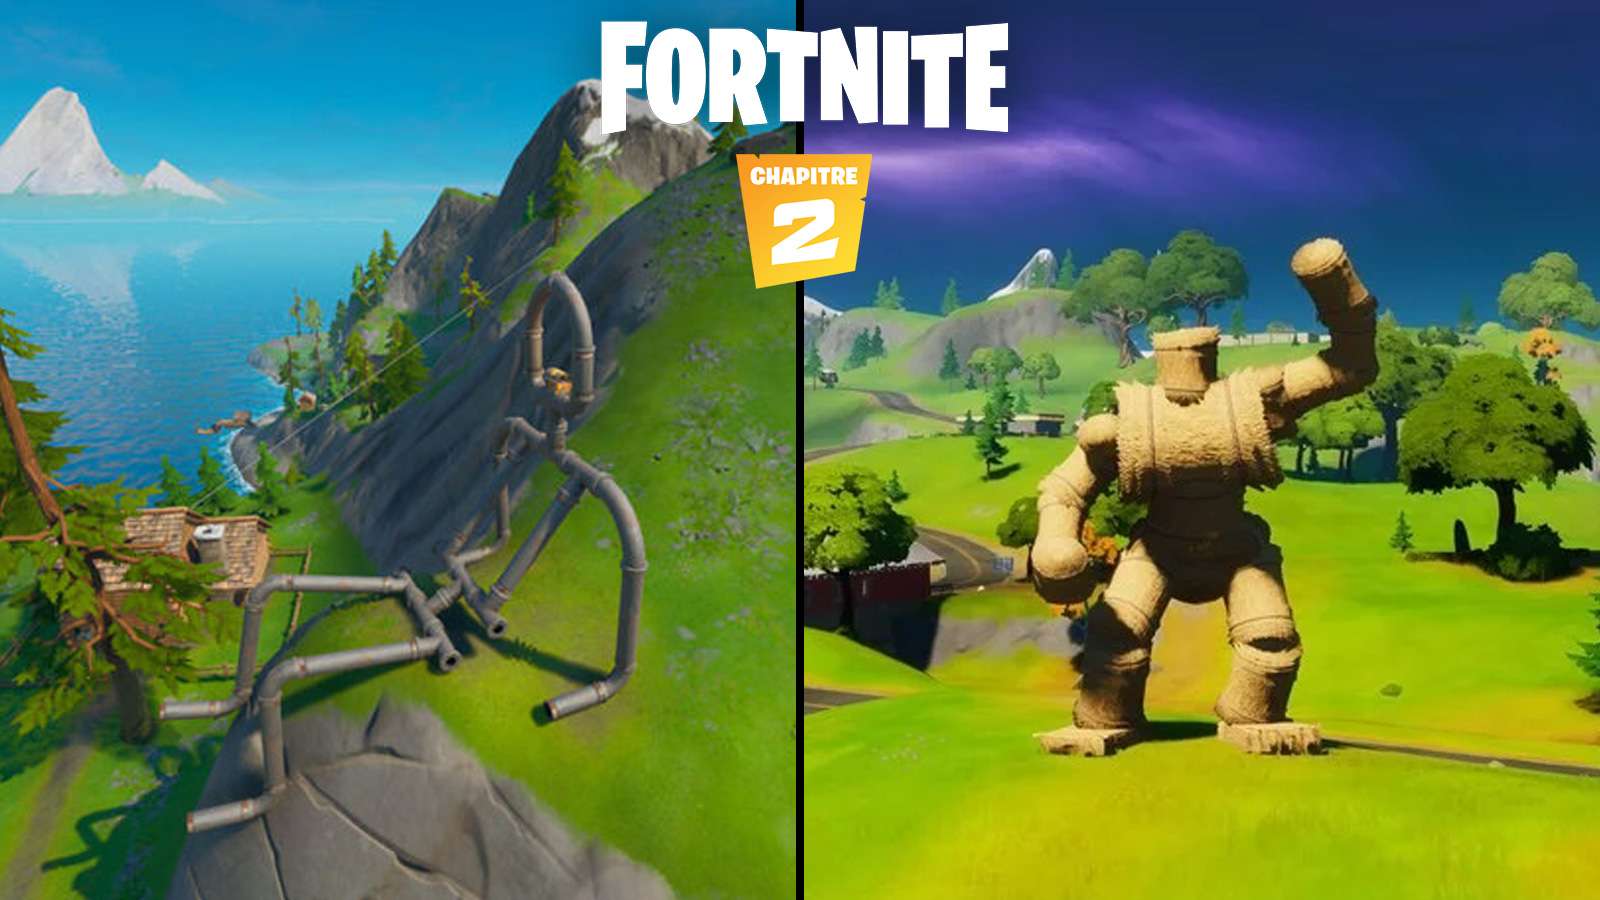 EPIC GAMES